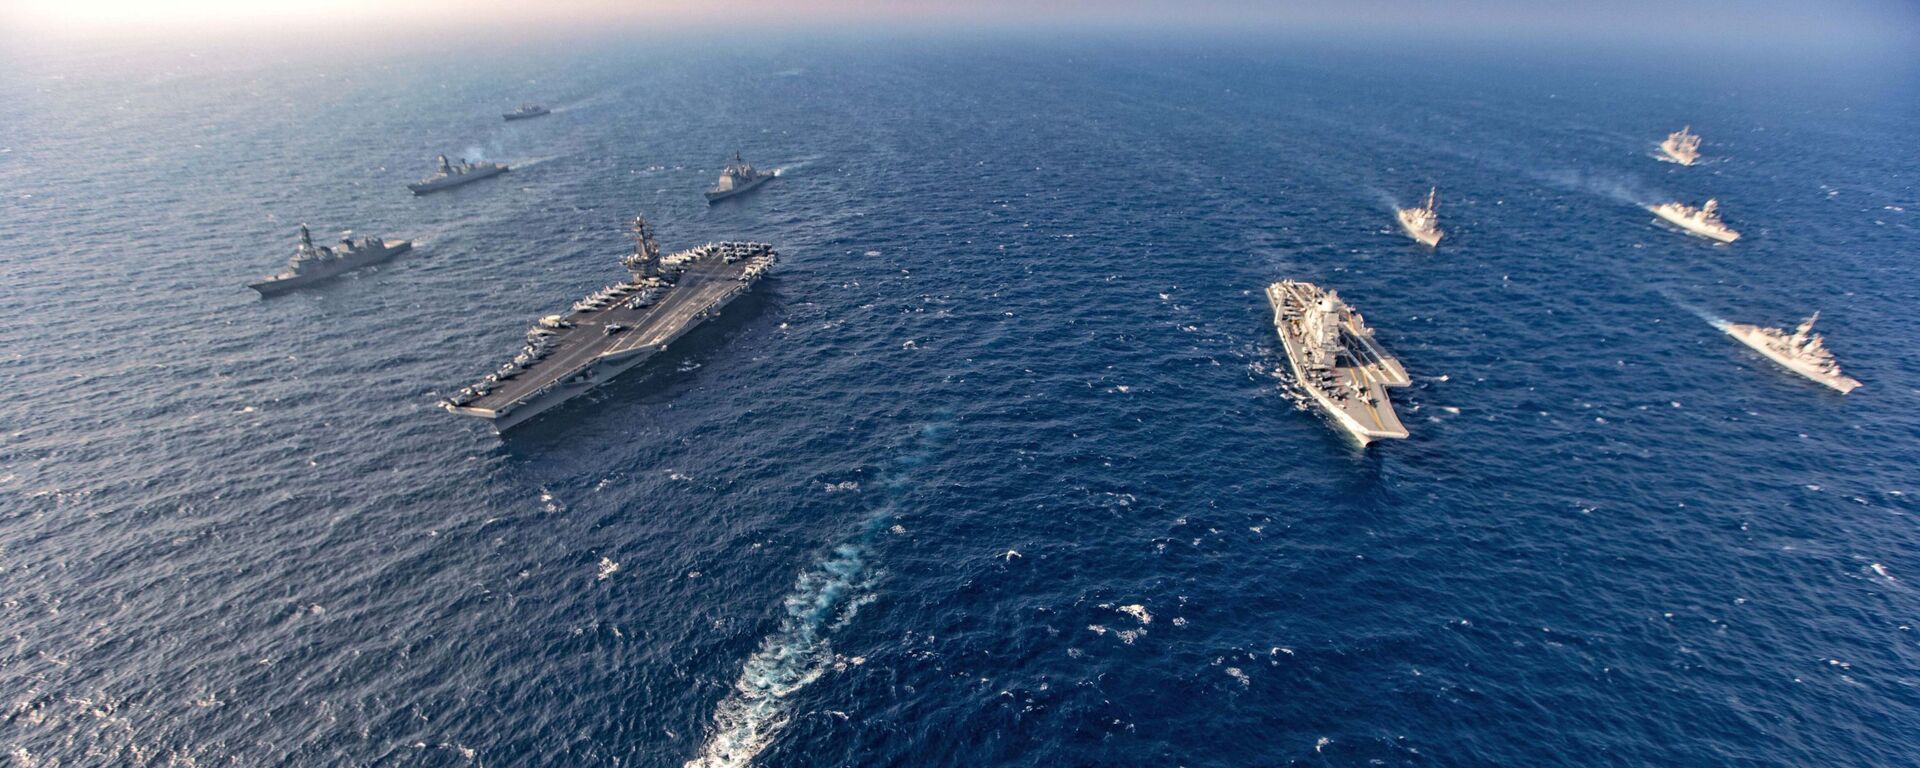 Aircraft carriers and warships participate in the second phase of Malabar naval exercise, a joint exercise comprising of India, US, Japan and Australia, in the Northern Arabian Sea on Tuesday, Nov. 17, 2020. - Sputnik International, 1920, 23.08.2021